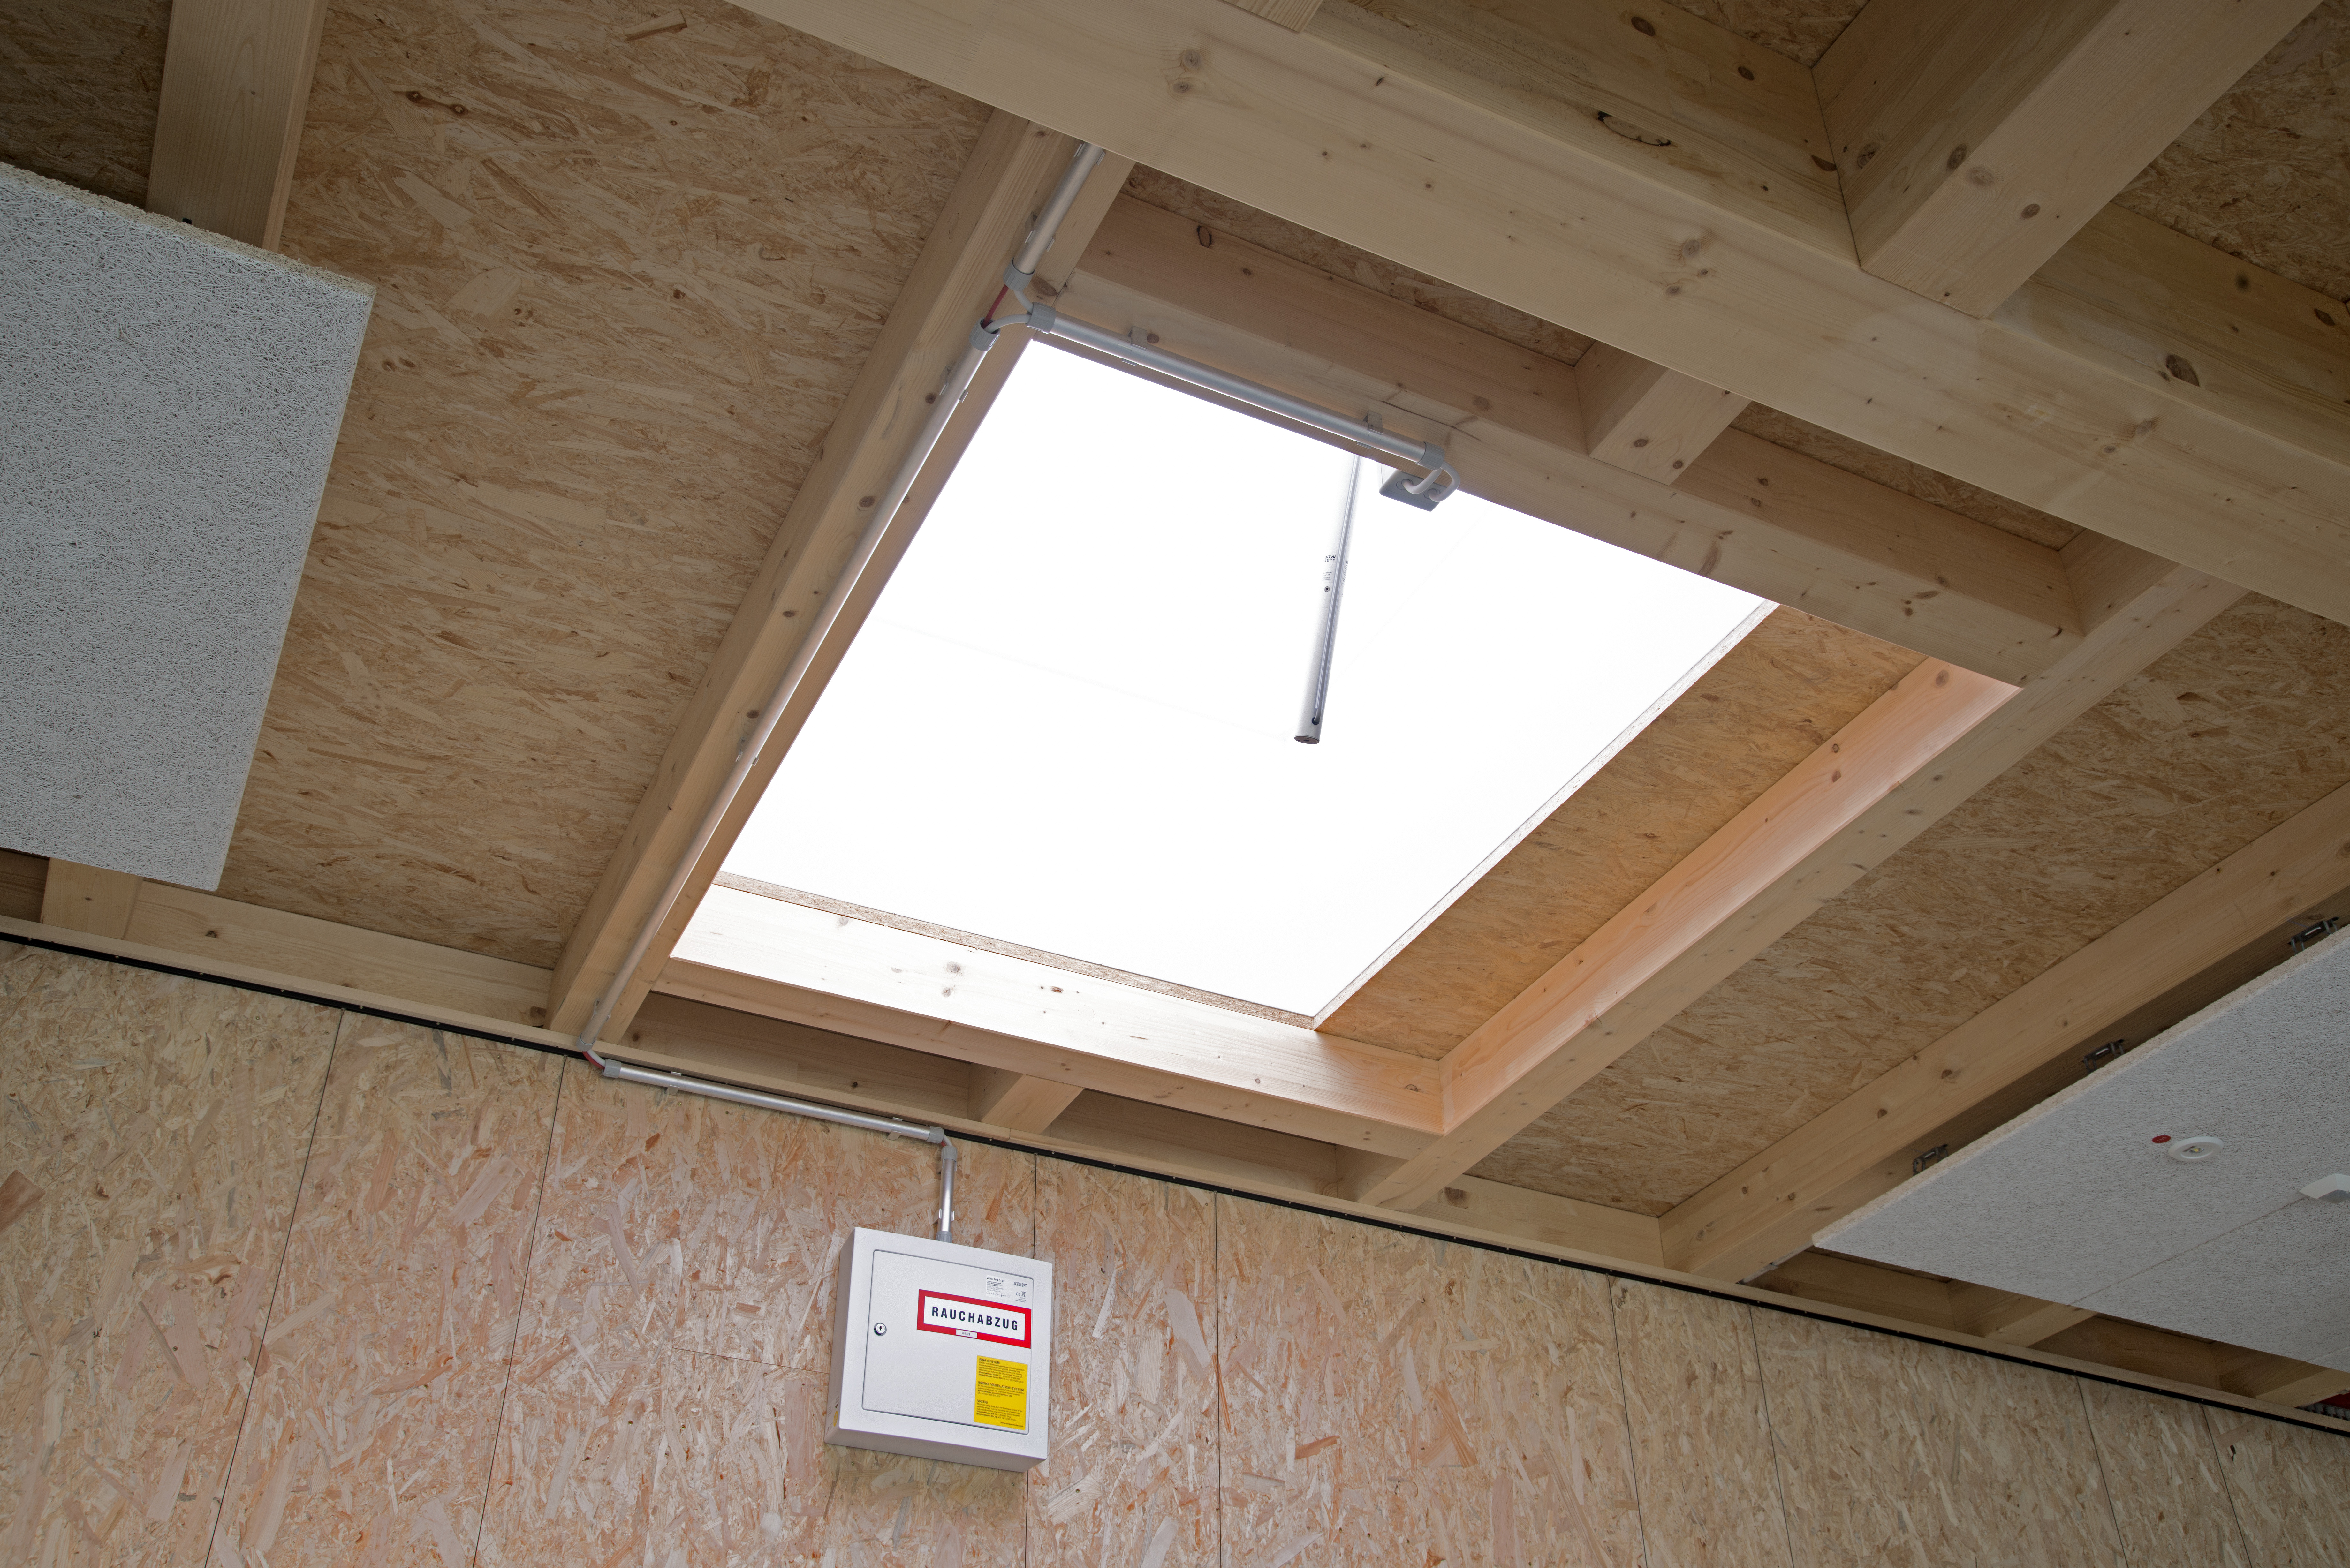 Fire protection in timber construction